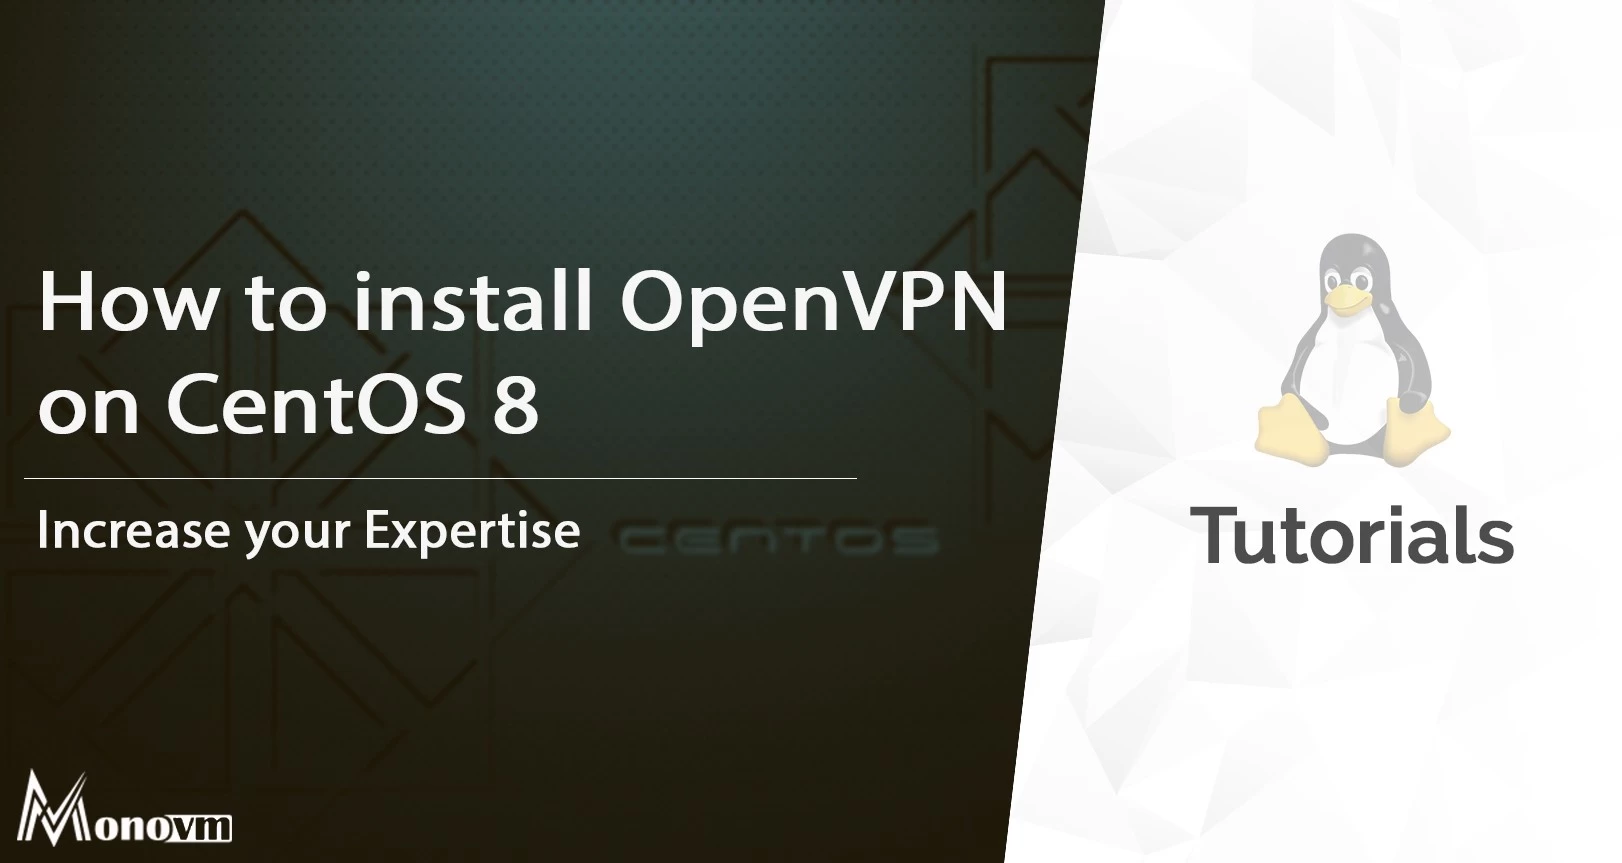 How to Install OpenVPN on CentOS 8?